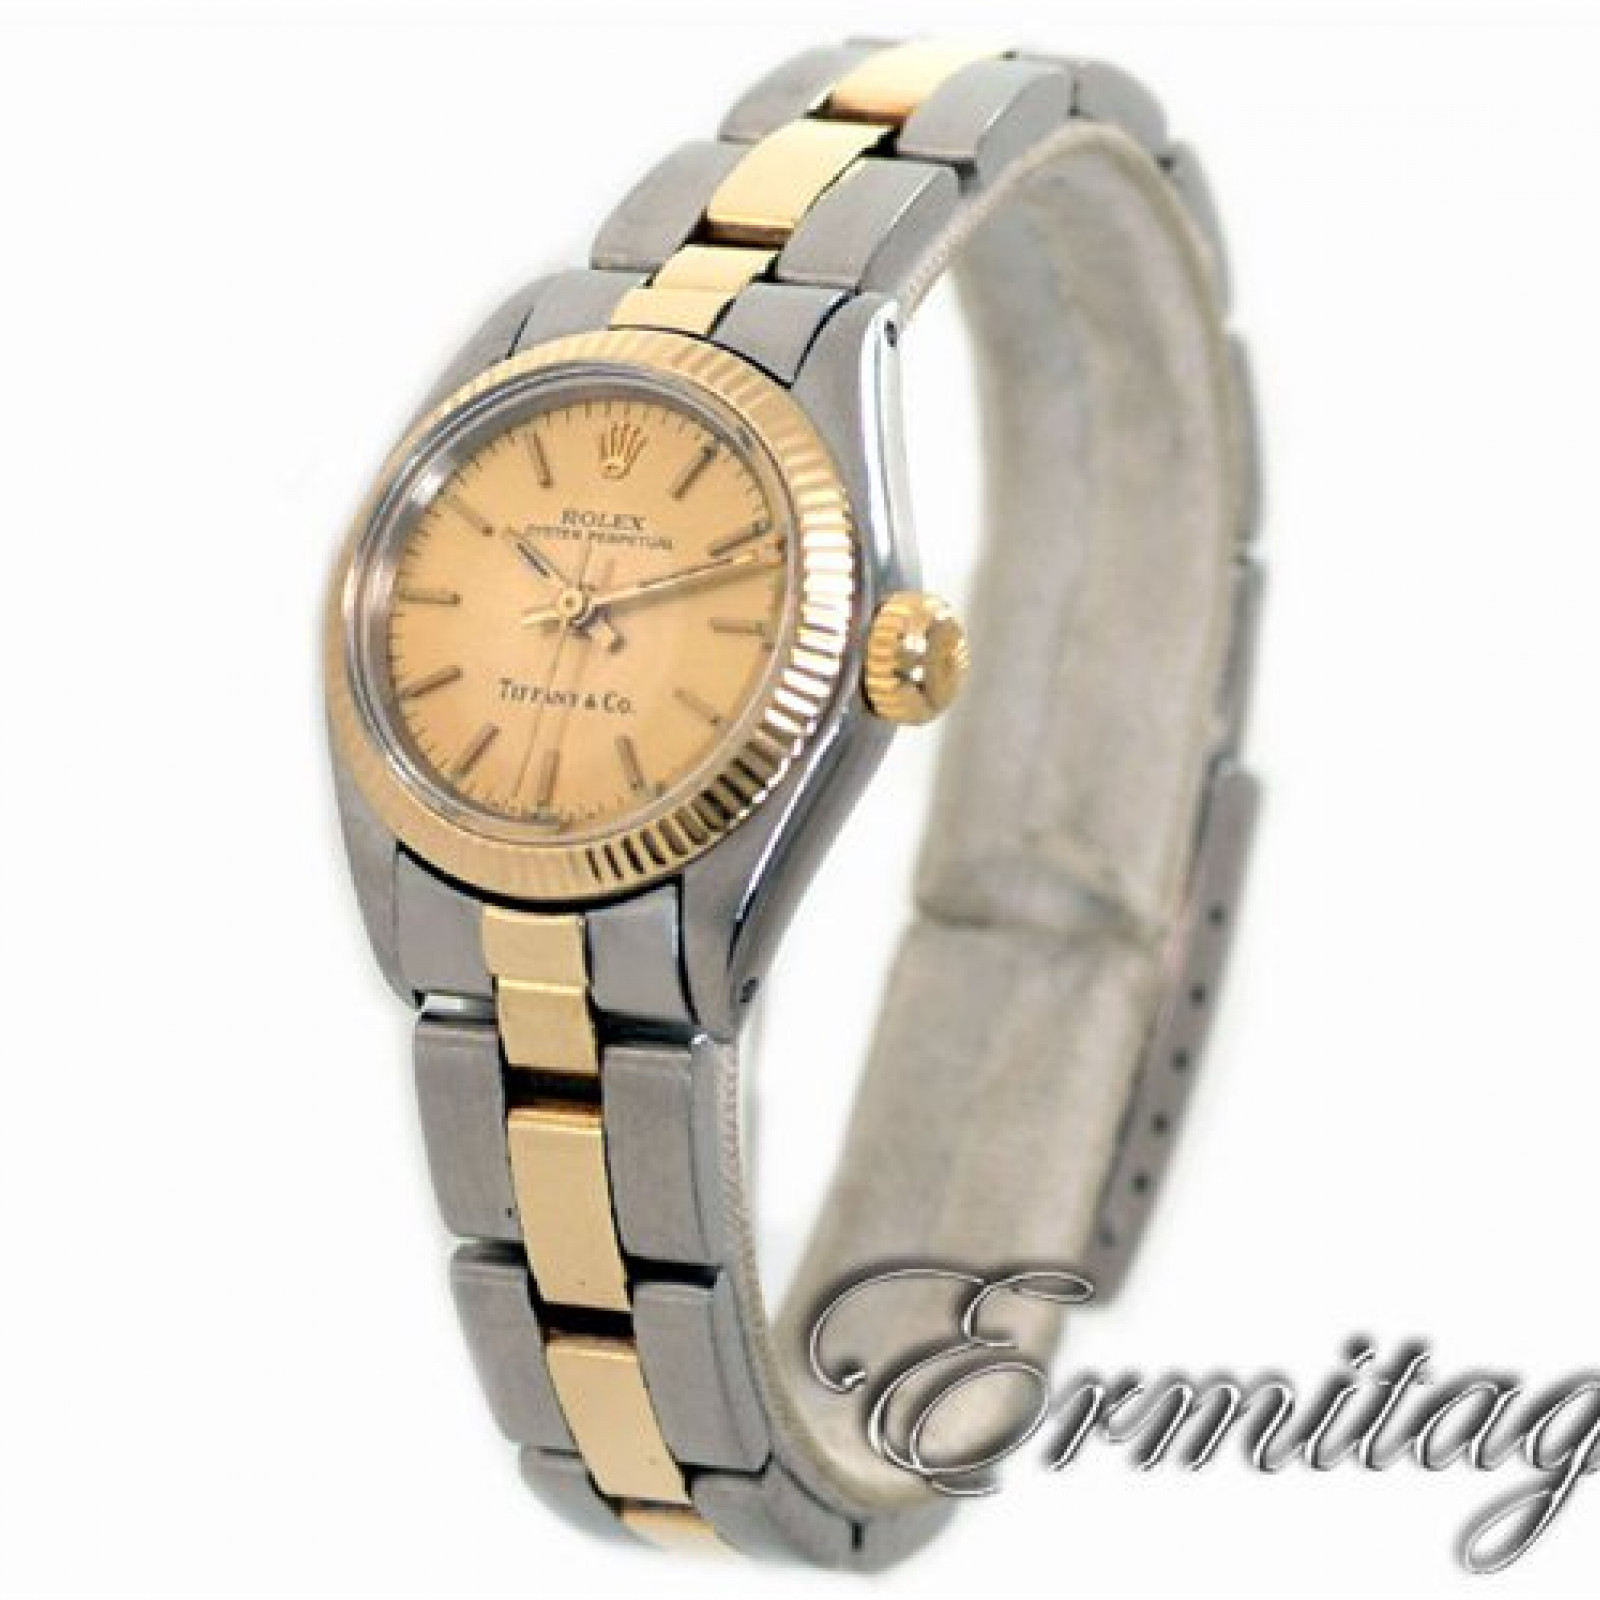 Vintage Rolex Oyster Perpetual 6719 Gold & Steel 1980